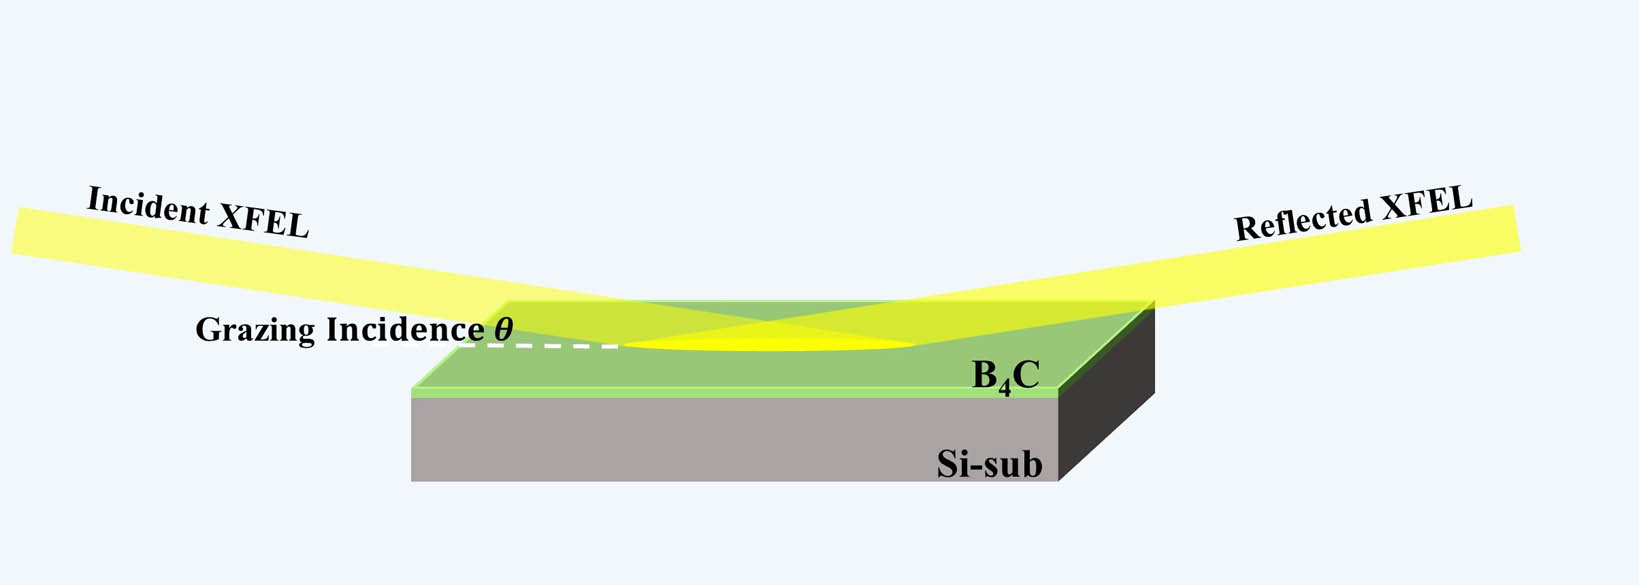 Schematic of an XFEL beam incident on a B4C/Si-sub mirror under grazing incidence.